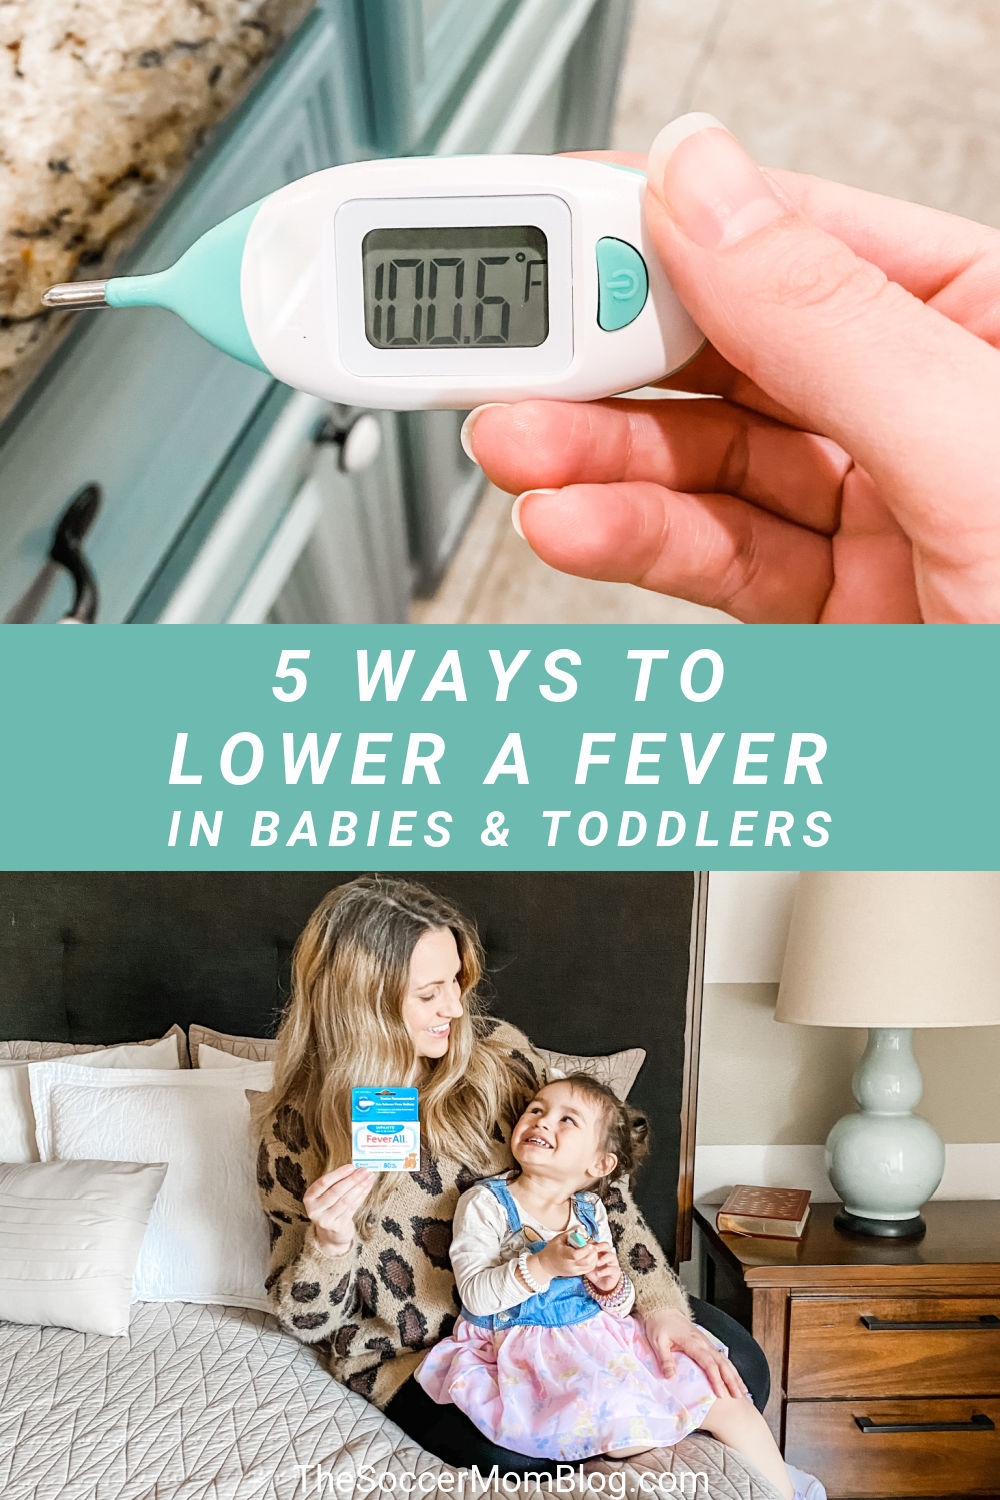 holding a digital thermometer; mom and toddler on bed